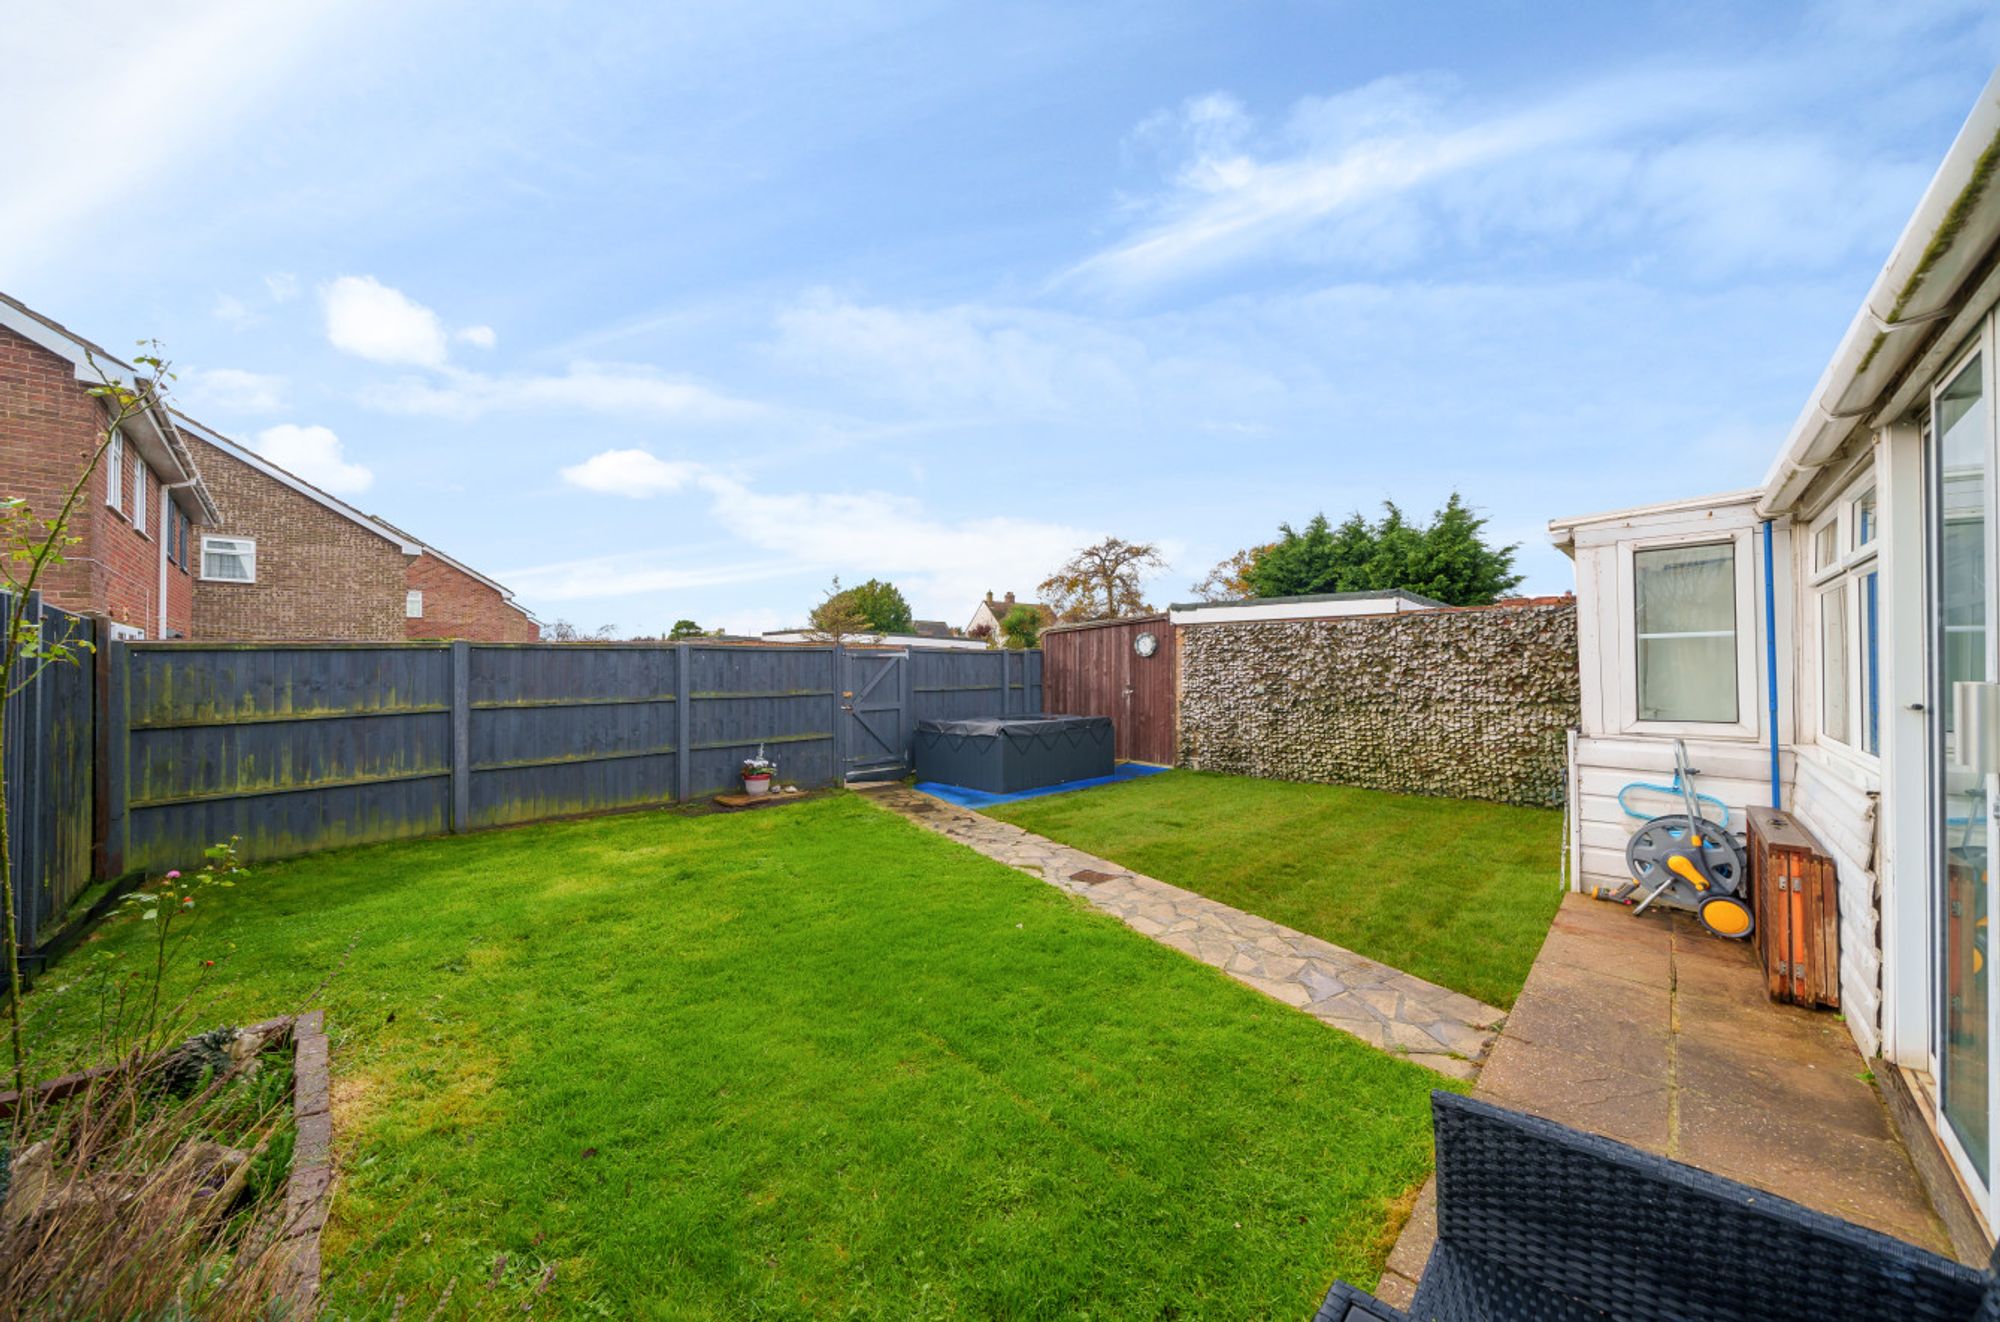 Gainsborough Drive, Selsey, PO20